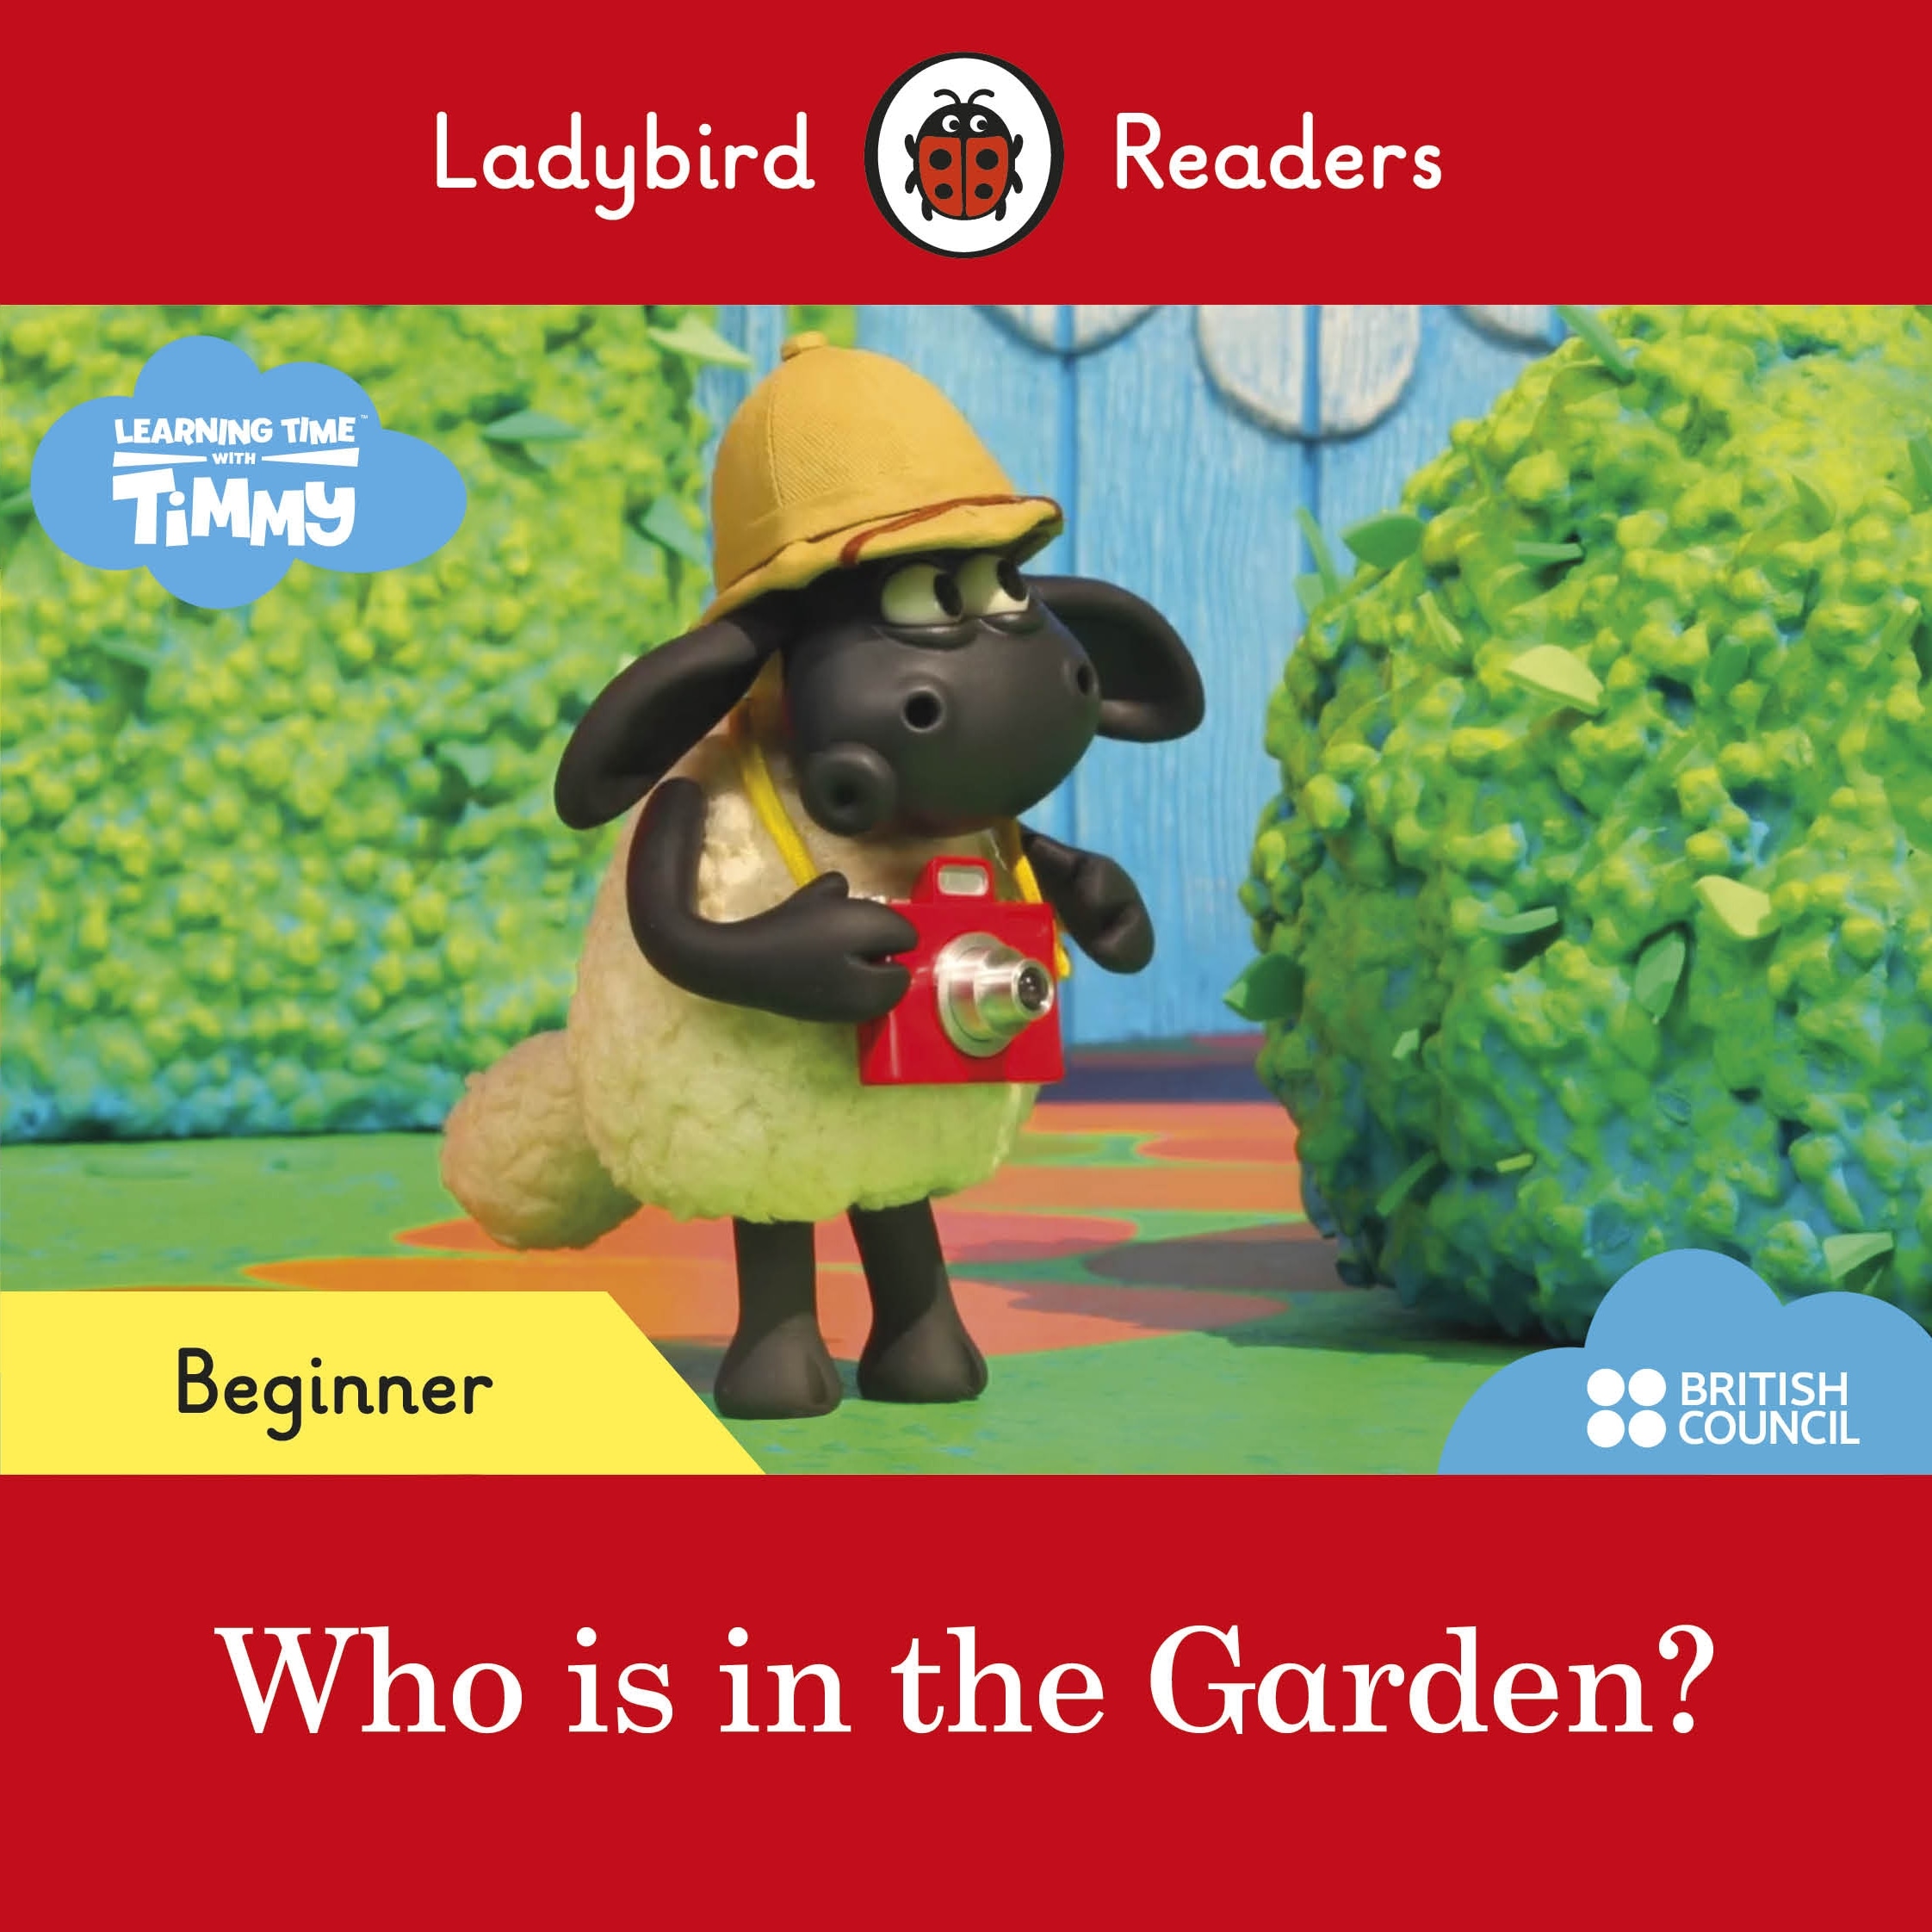 Ladybird Readers Beginner Level - Timmy Time: Who is in the Garden? (ELT Graded Reader)